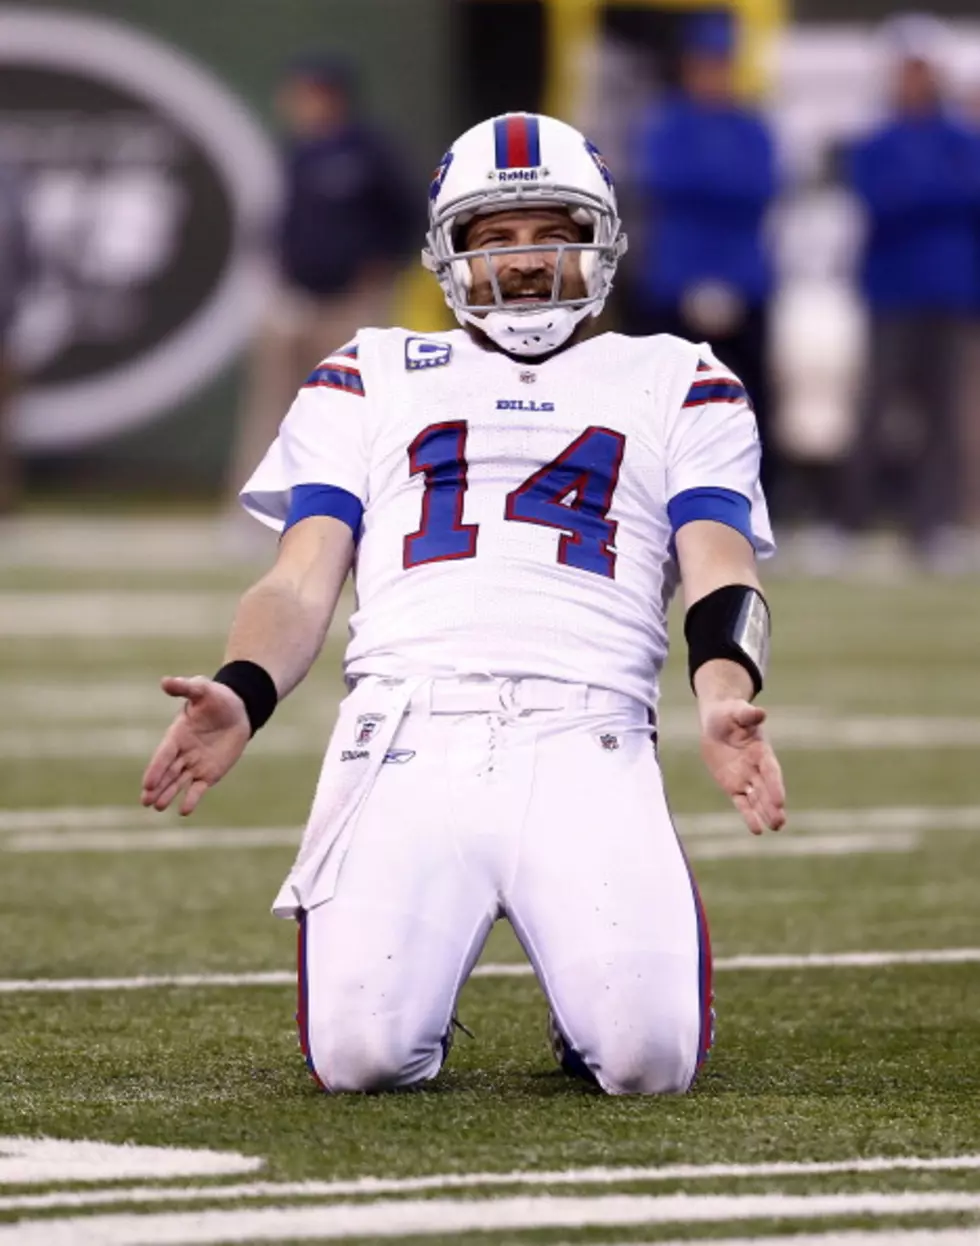 Who’s the Bills Blackout Hurting More?